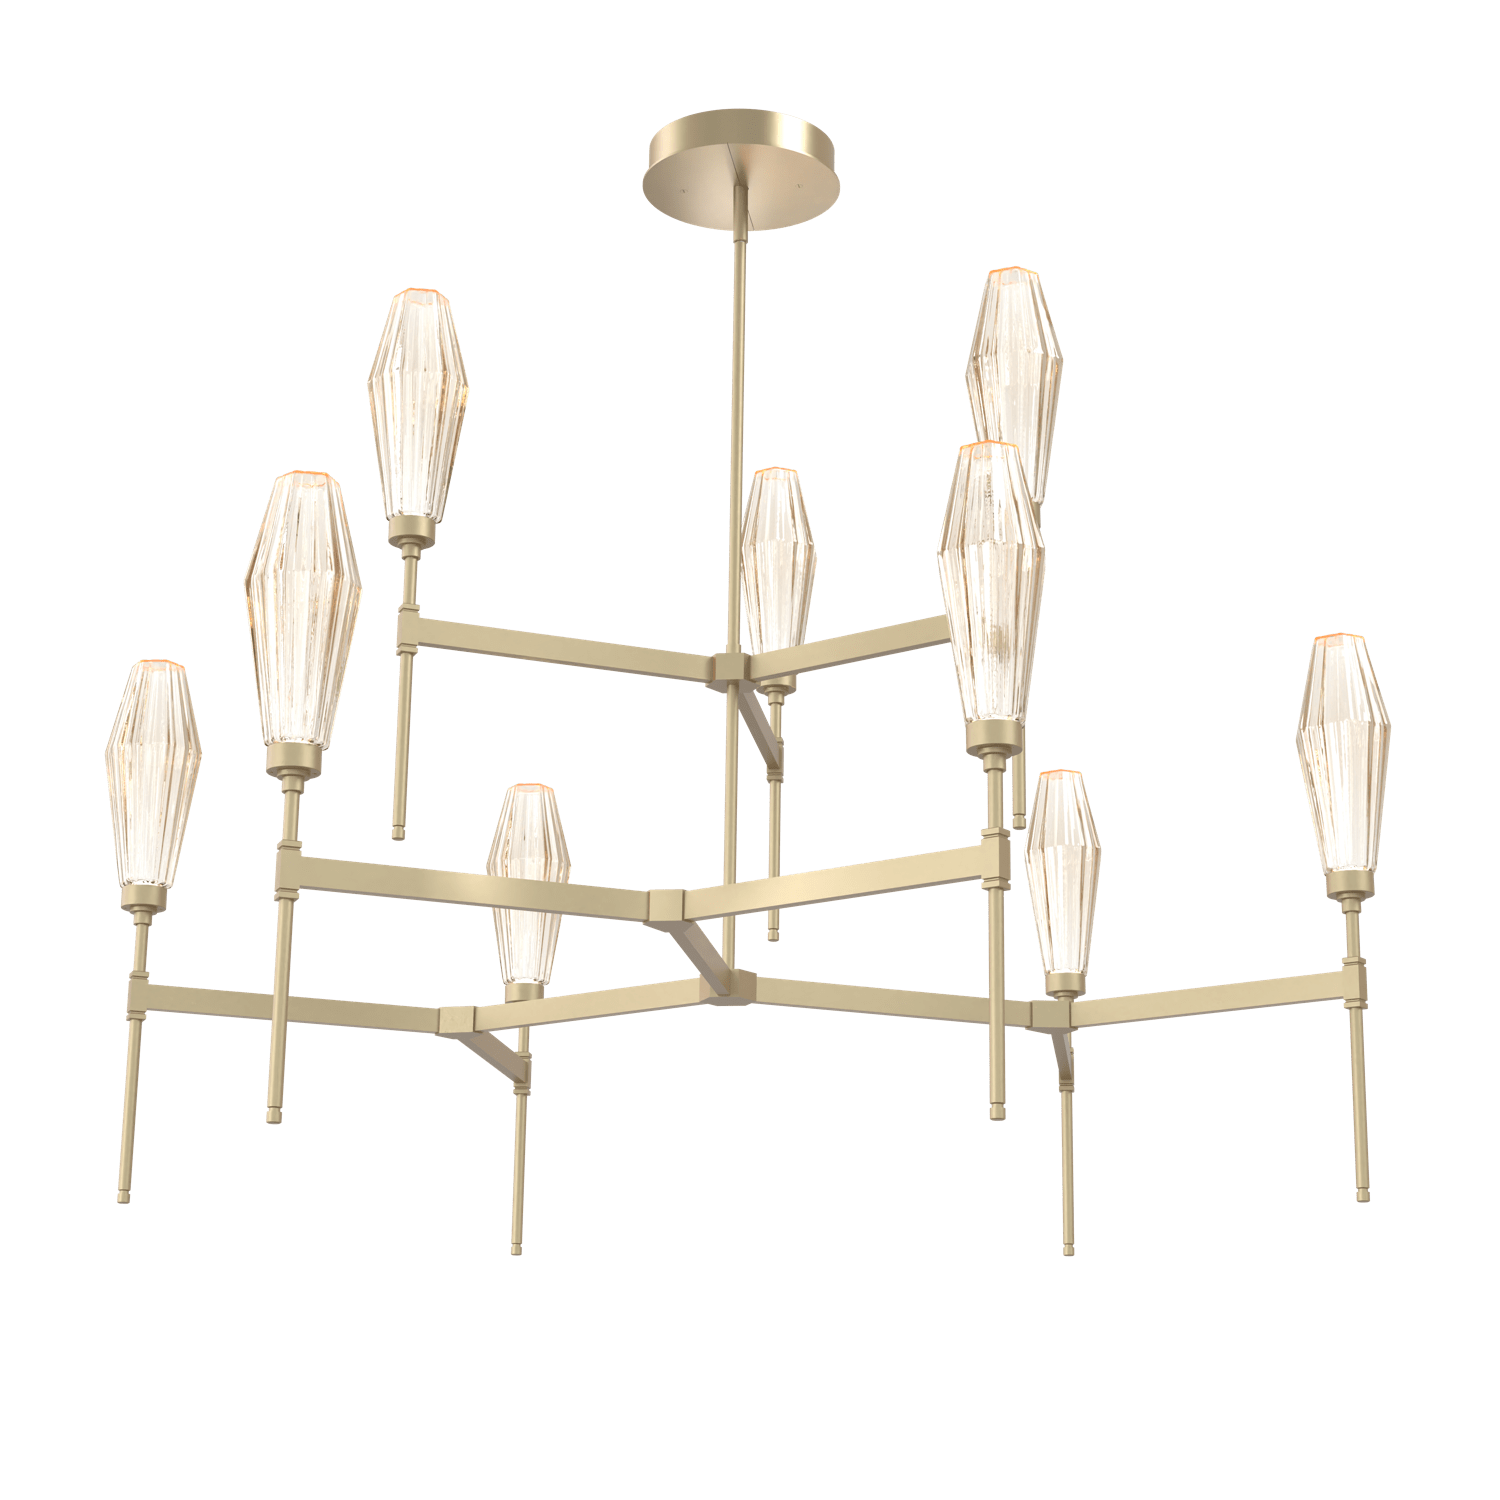 CHB0049-54-GB-RA-Hammerton-Studio-Aalto-54-inch-round-two-tier-belvedere-chandelier-with-gilded-brass-finish-and-optic-ribbed-amber-glass-shades-and-LED-lamping